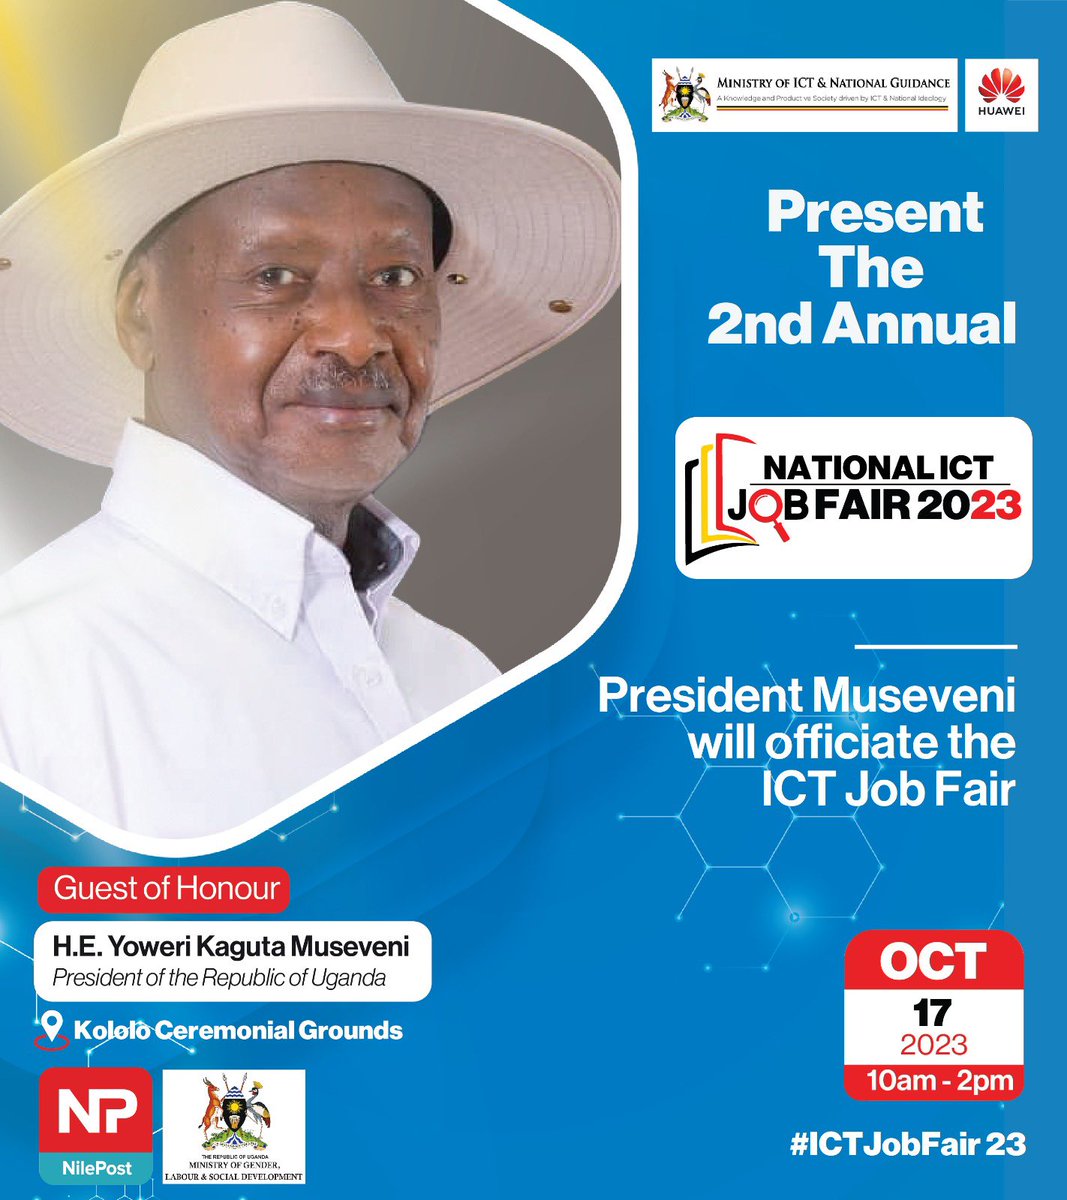 Top of the morning- We invite you to the National ICT Job Fair. Lots of opportunities, apprenticeships, jobs and trainings will be offered by various companies. Come one, come All! #ICTJobFair23